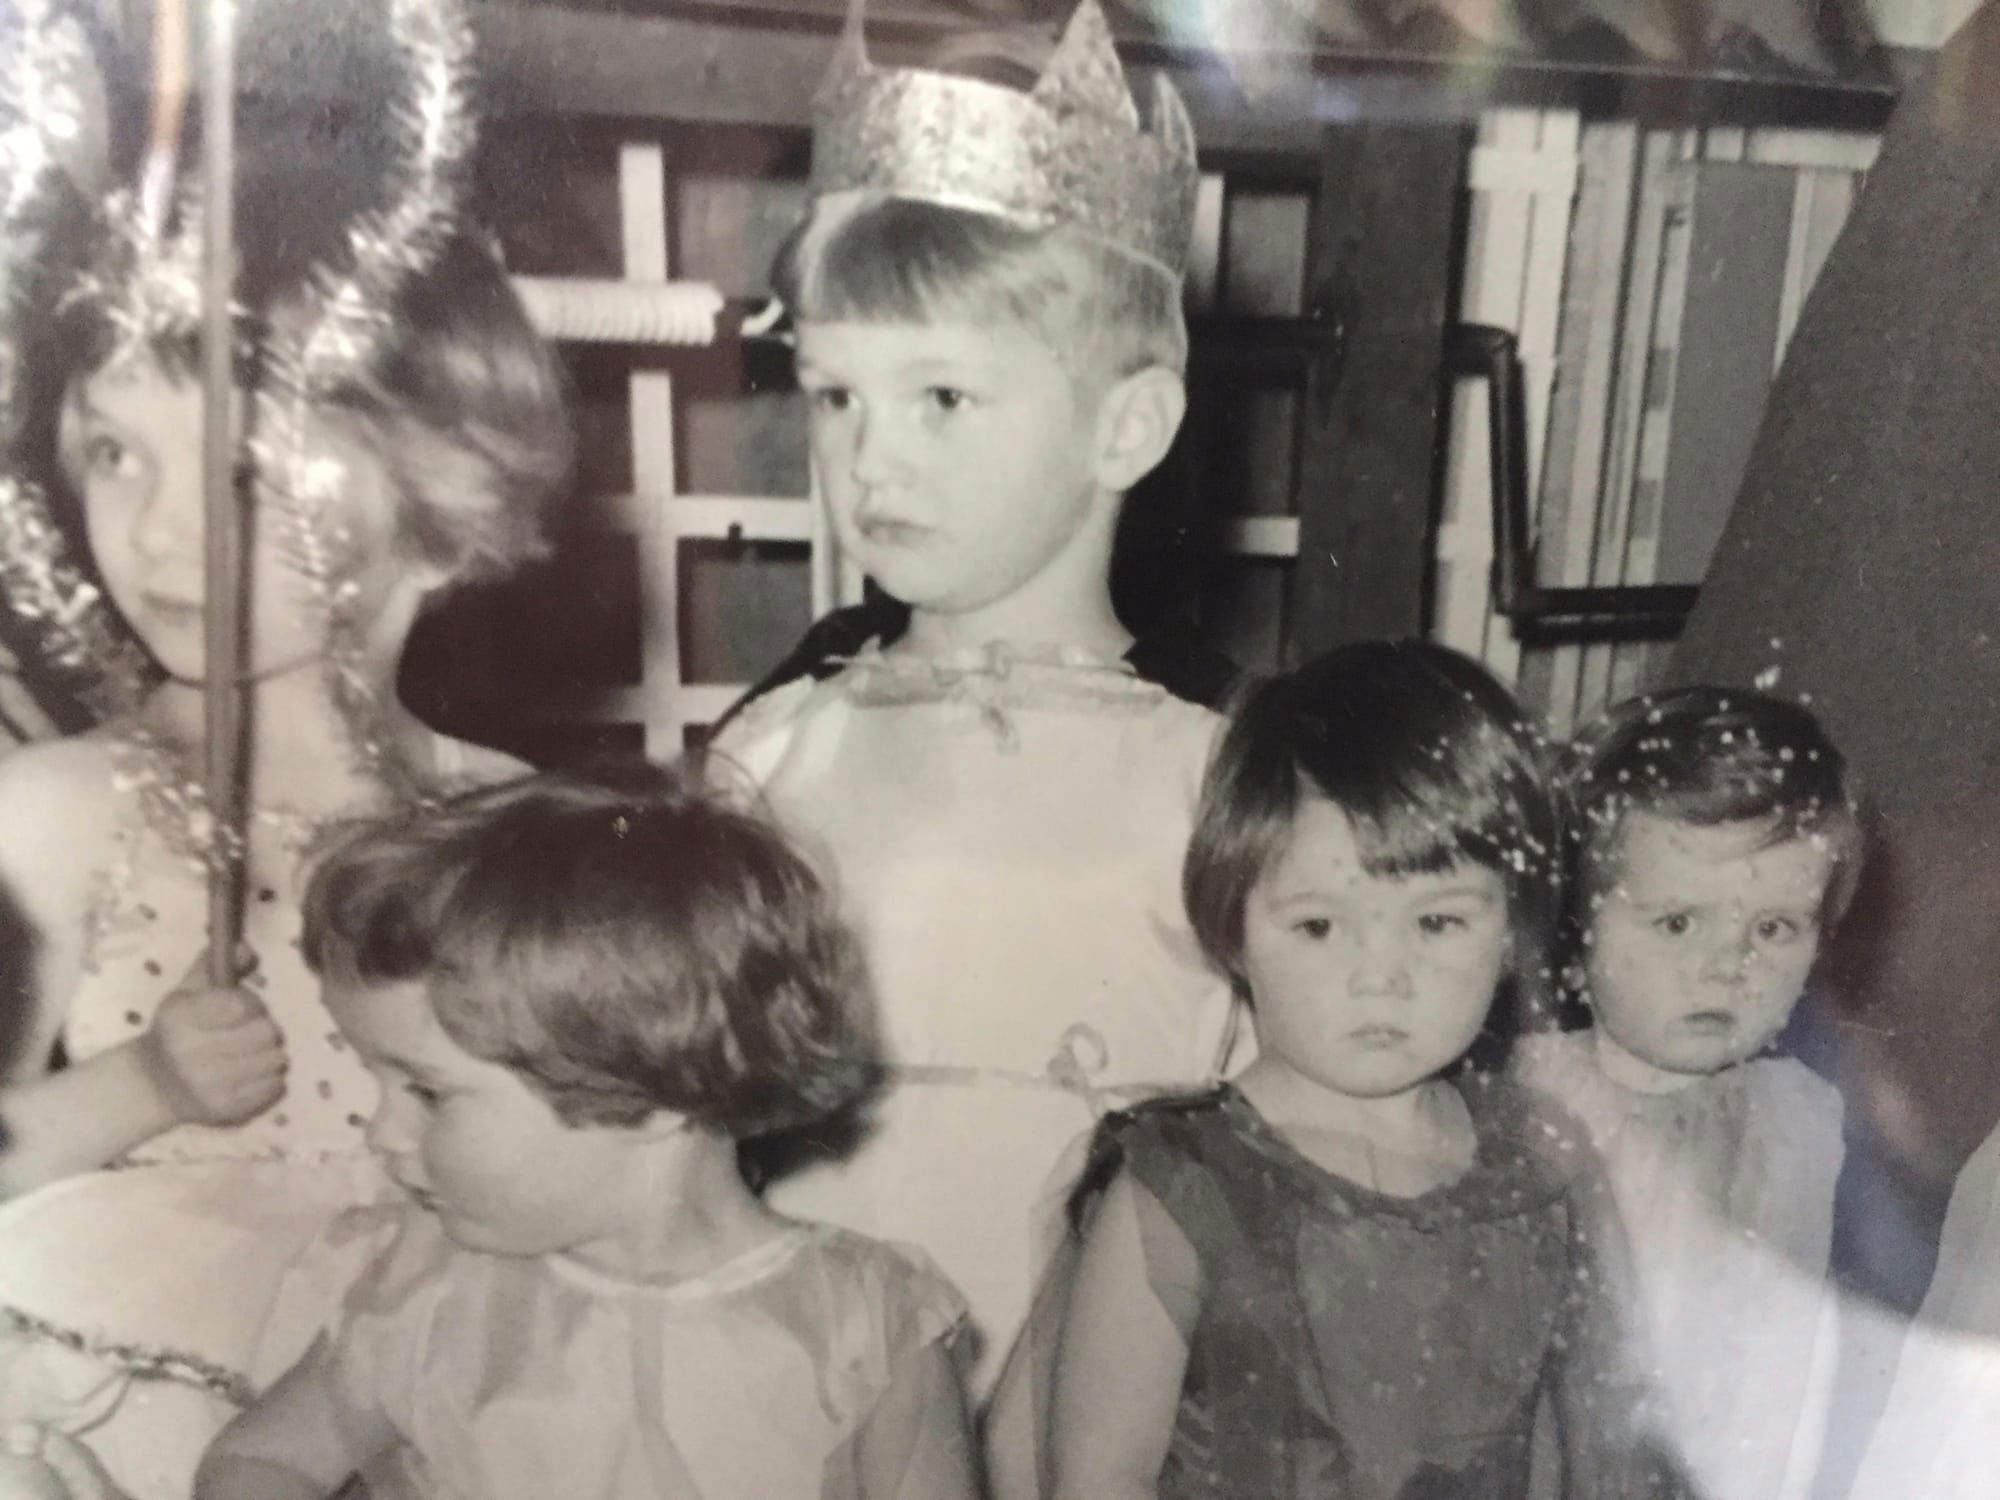 MY FIRST PUBLIC APPEARANCE AS 'KING OF THE FAIRIES'